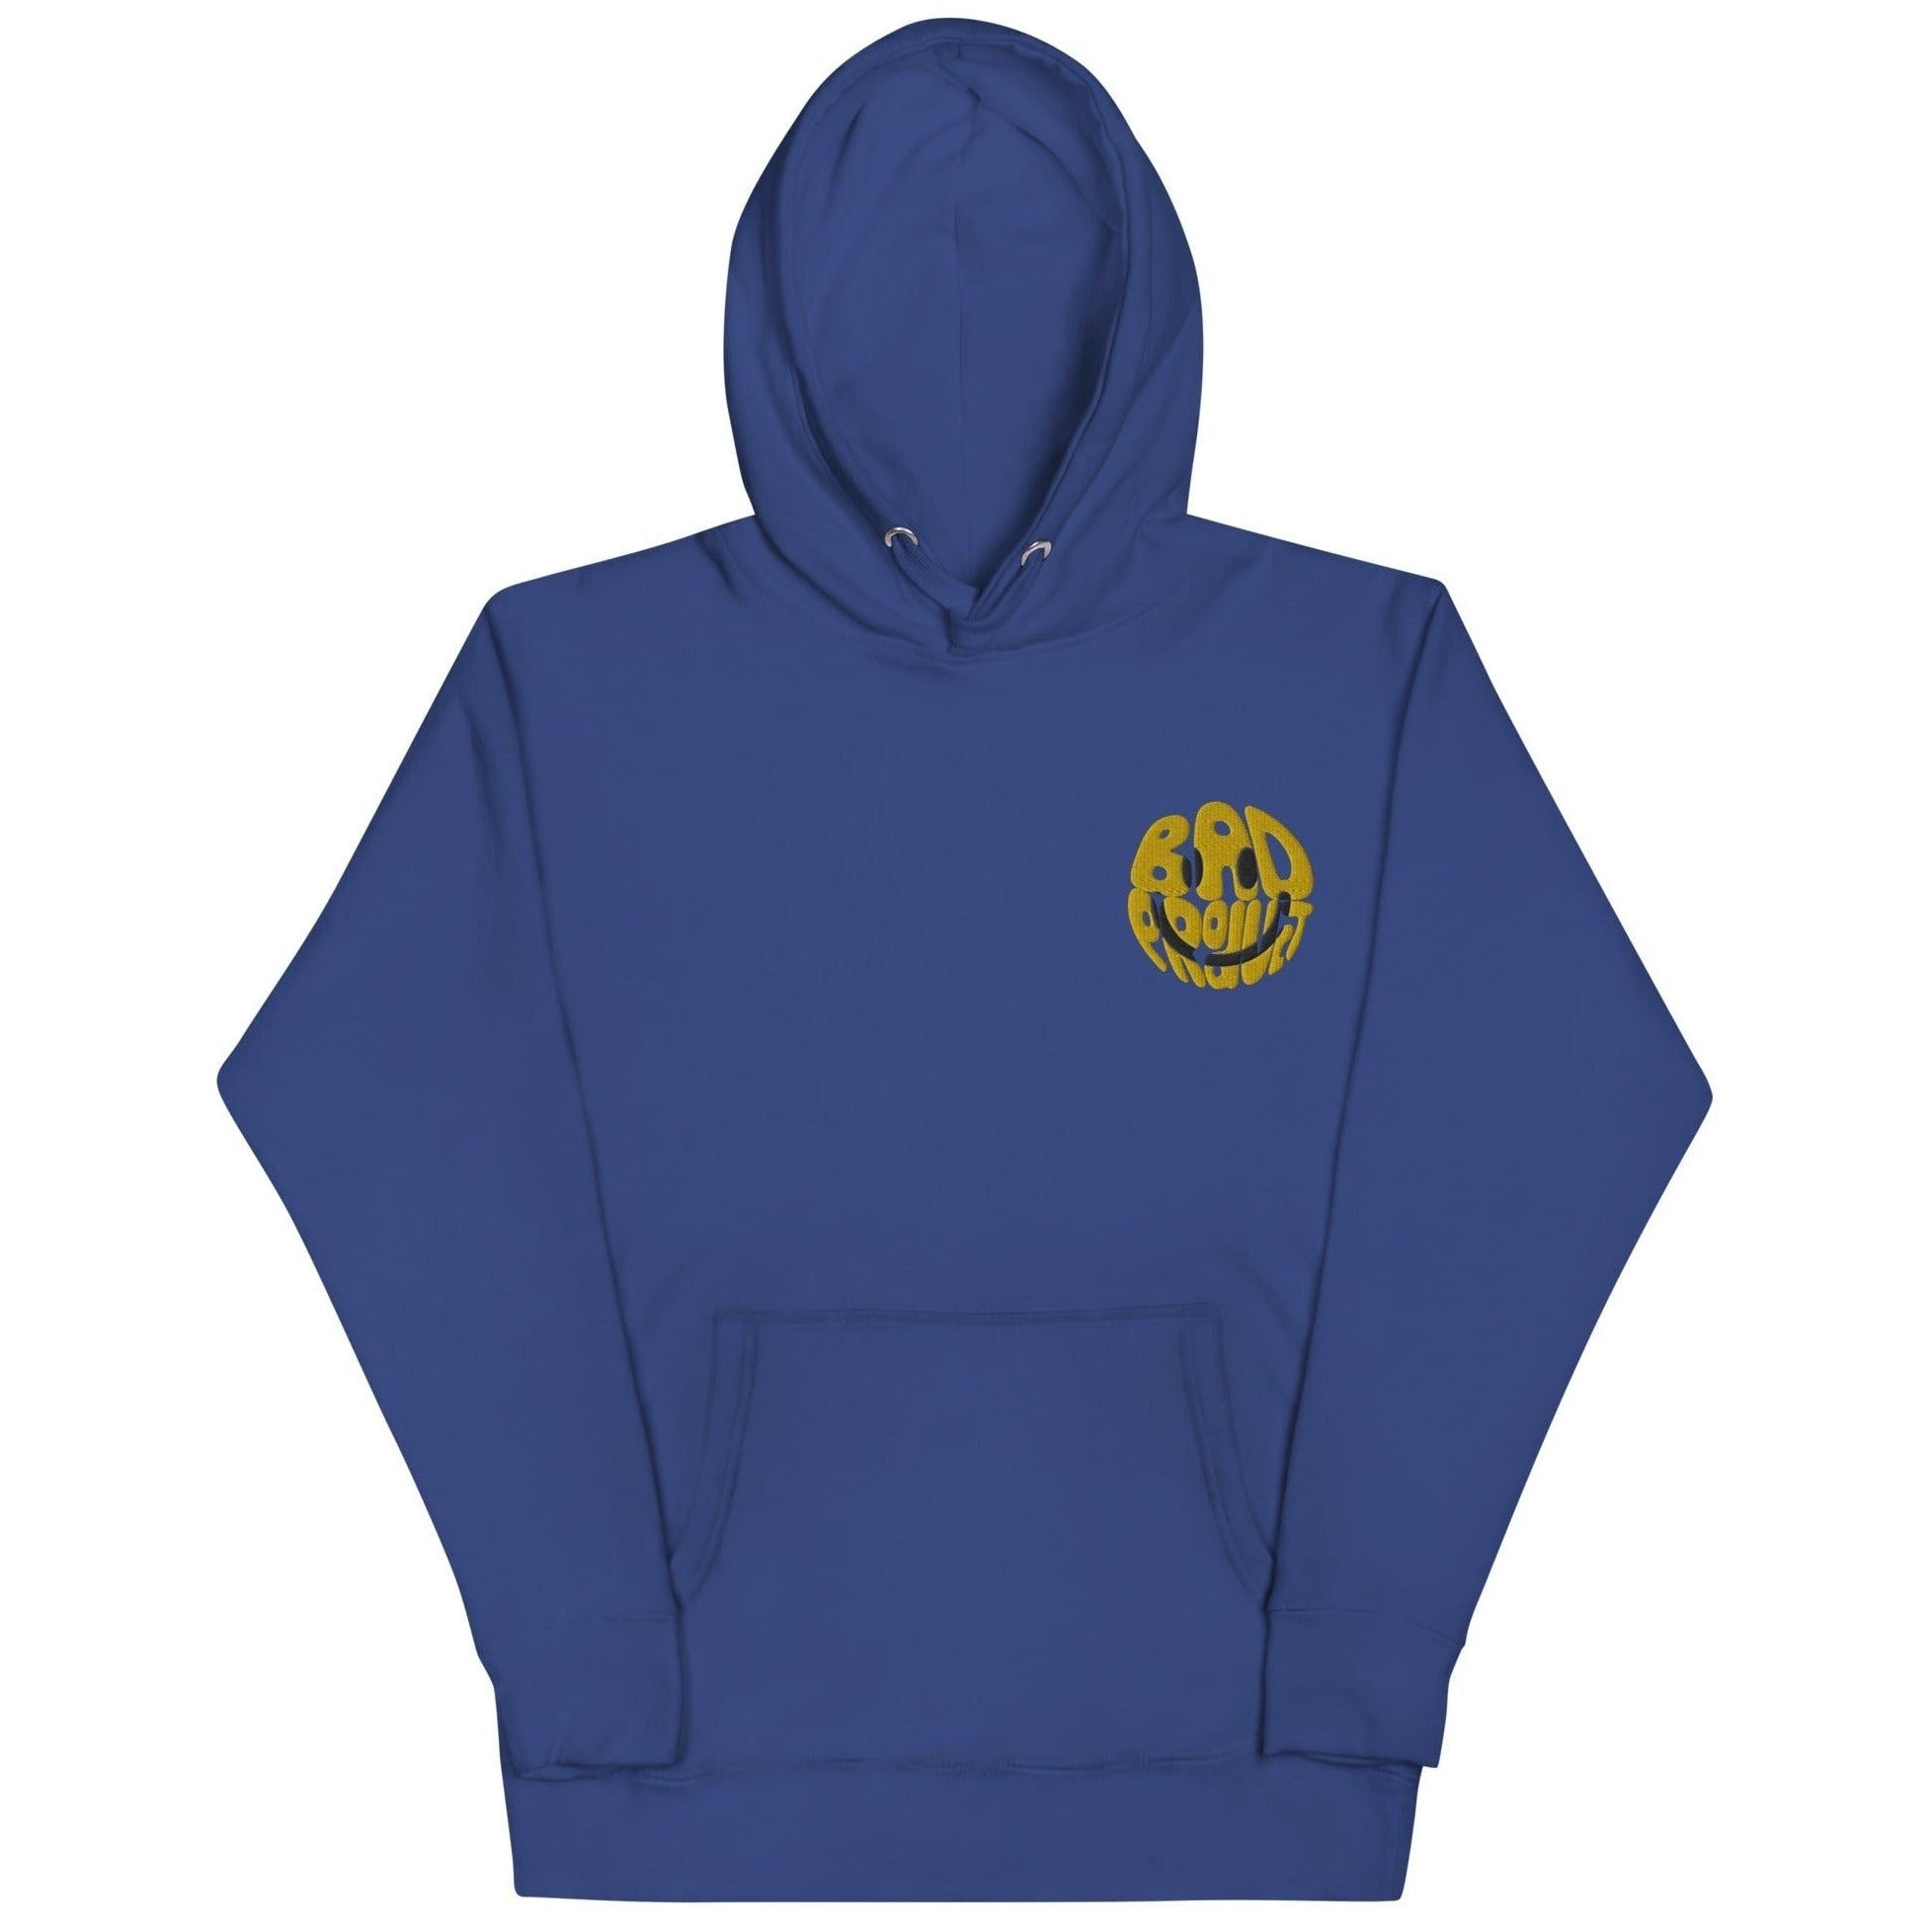 Royal Blue hoodie featuring an embroidered gold smiley logo